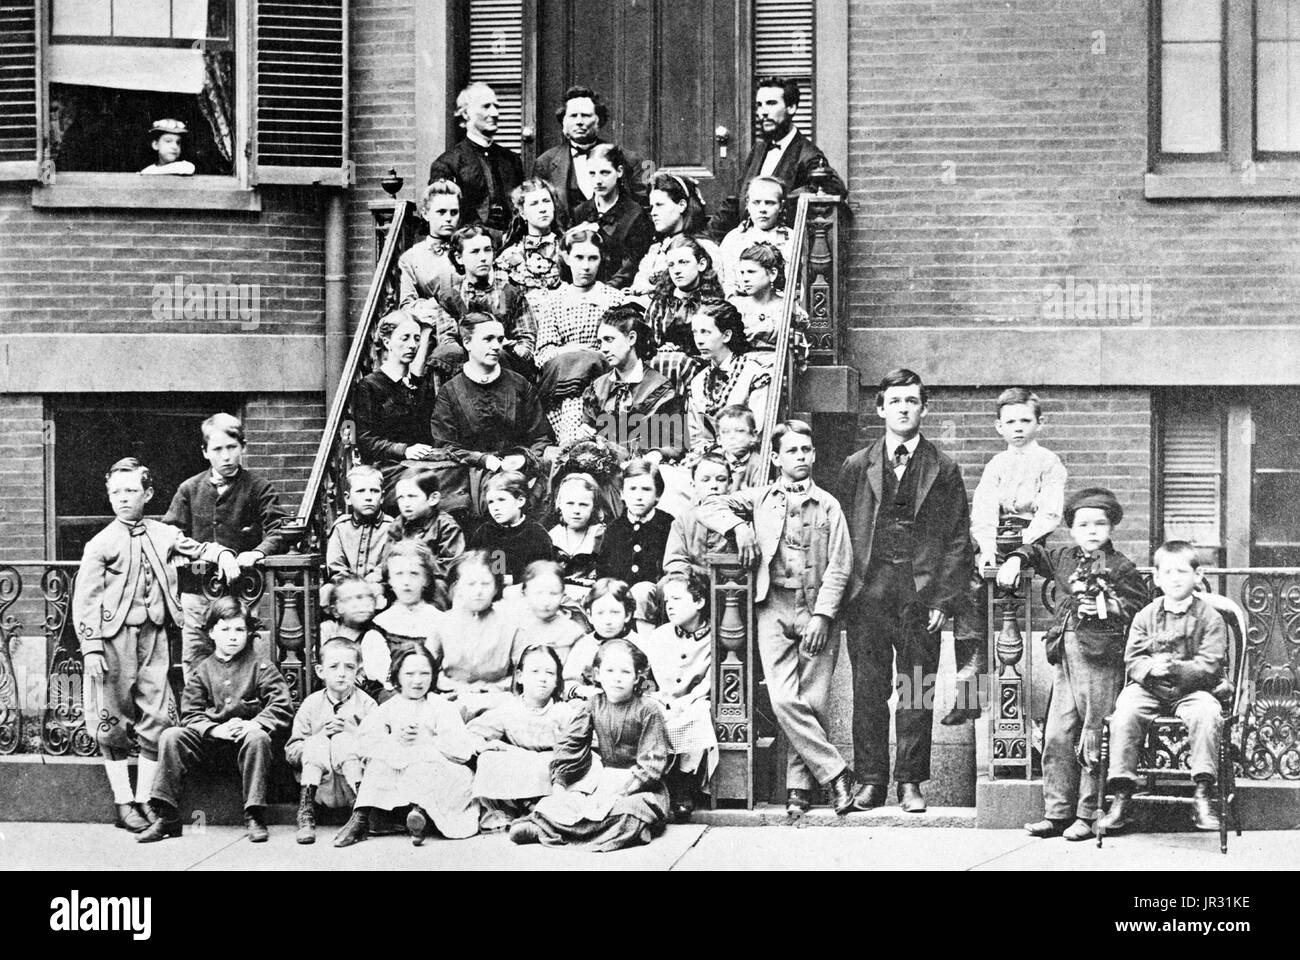 Bell, on top step with Dexter King, founder of the school, and Ira Allen, chairman of school committee, three steps down are teachers Annie Bond, Sarah Fuller, Ellen Barton, and Mary True, students are seated on the steps and standing on the sidewalk at entrance to the Pemberton Square School (Boston School for the Deaf). Alexander Graham Bell (March 3, 1847 - August 2, 1922) was a Scottish-American speech therapist and inventor of the telephone. Bell followed his father and grandfather into the speech therapy profession, but also studied sound waves and the mechanics of speech. By 1871, he ha Stock Photo